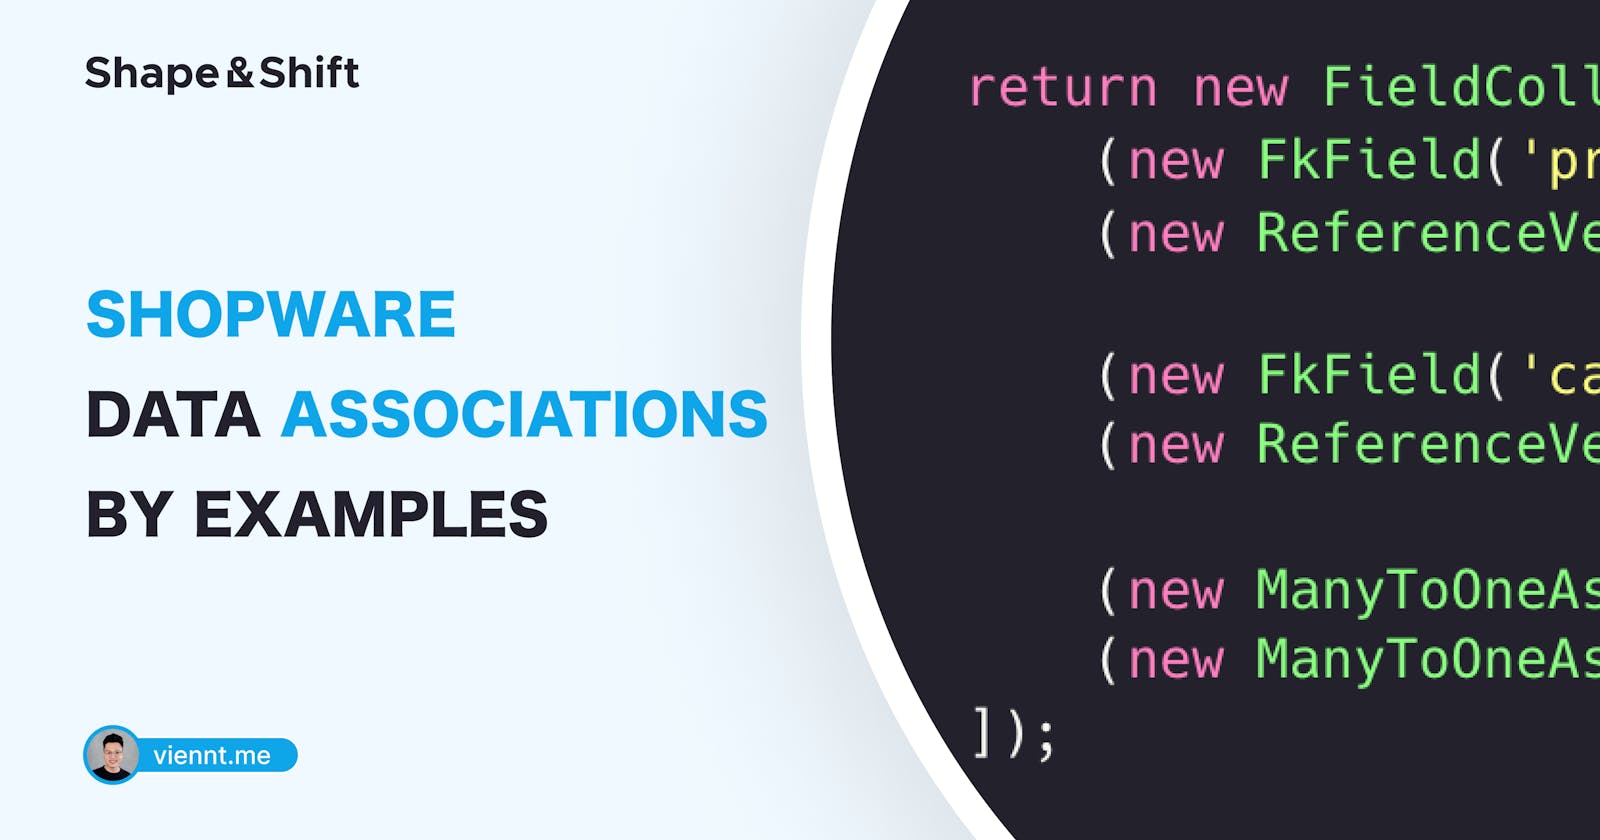 Shopware data associations by examples